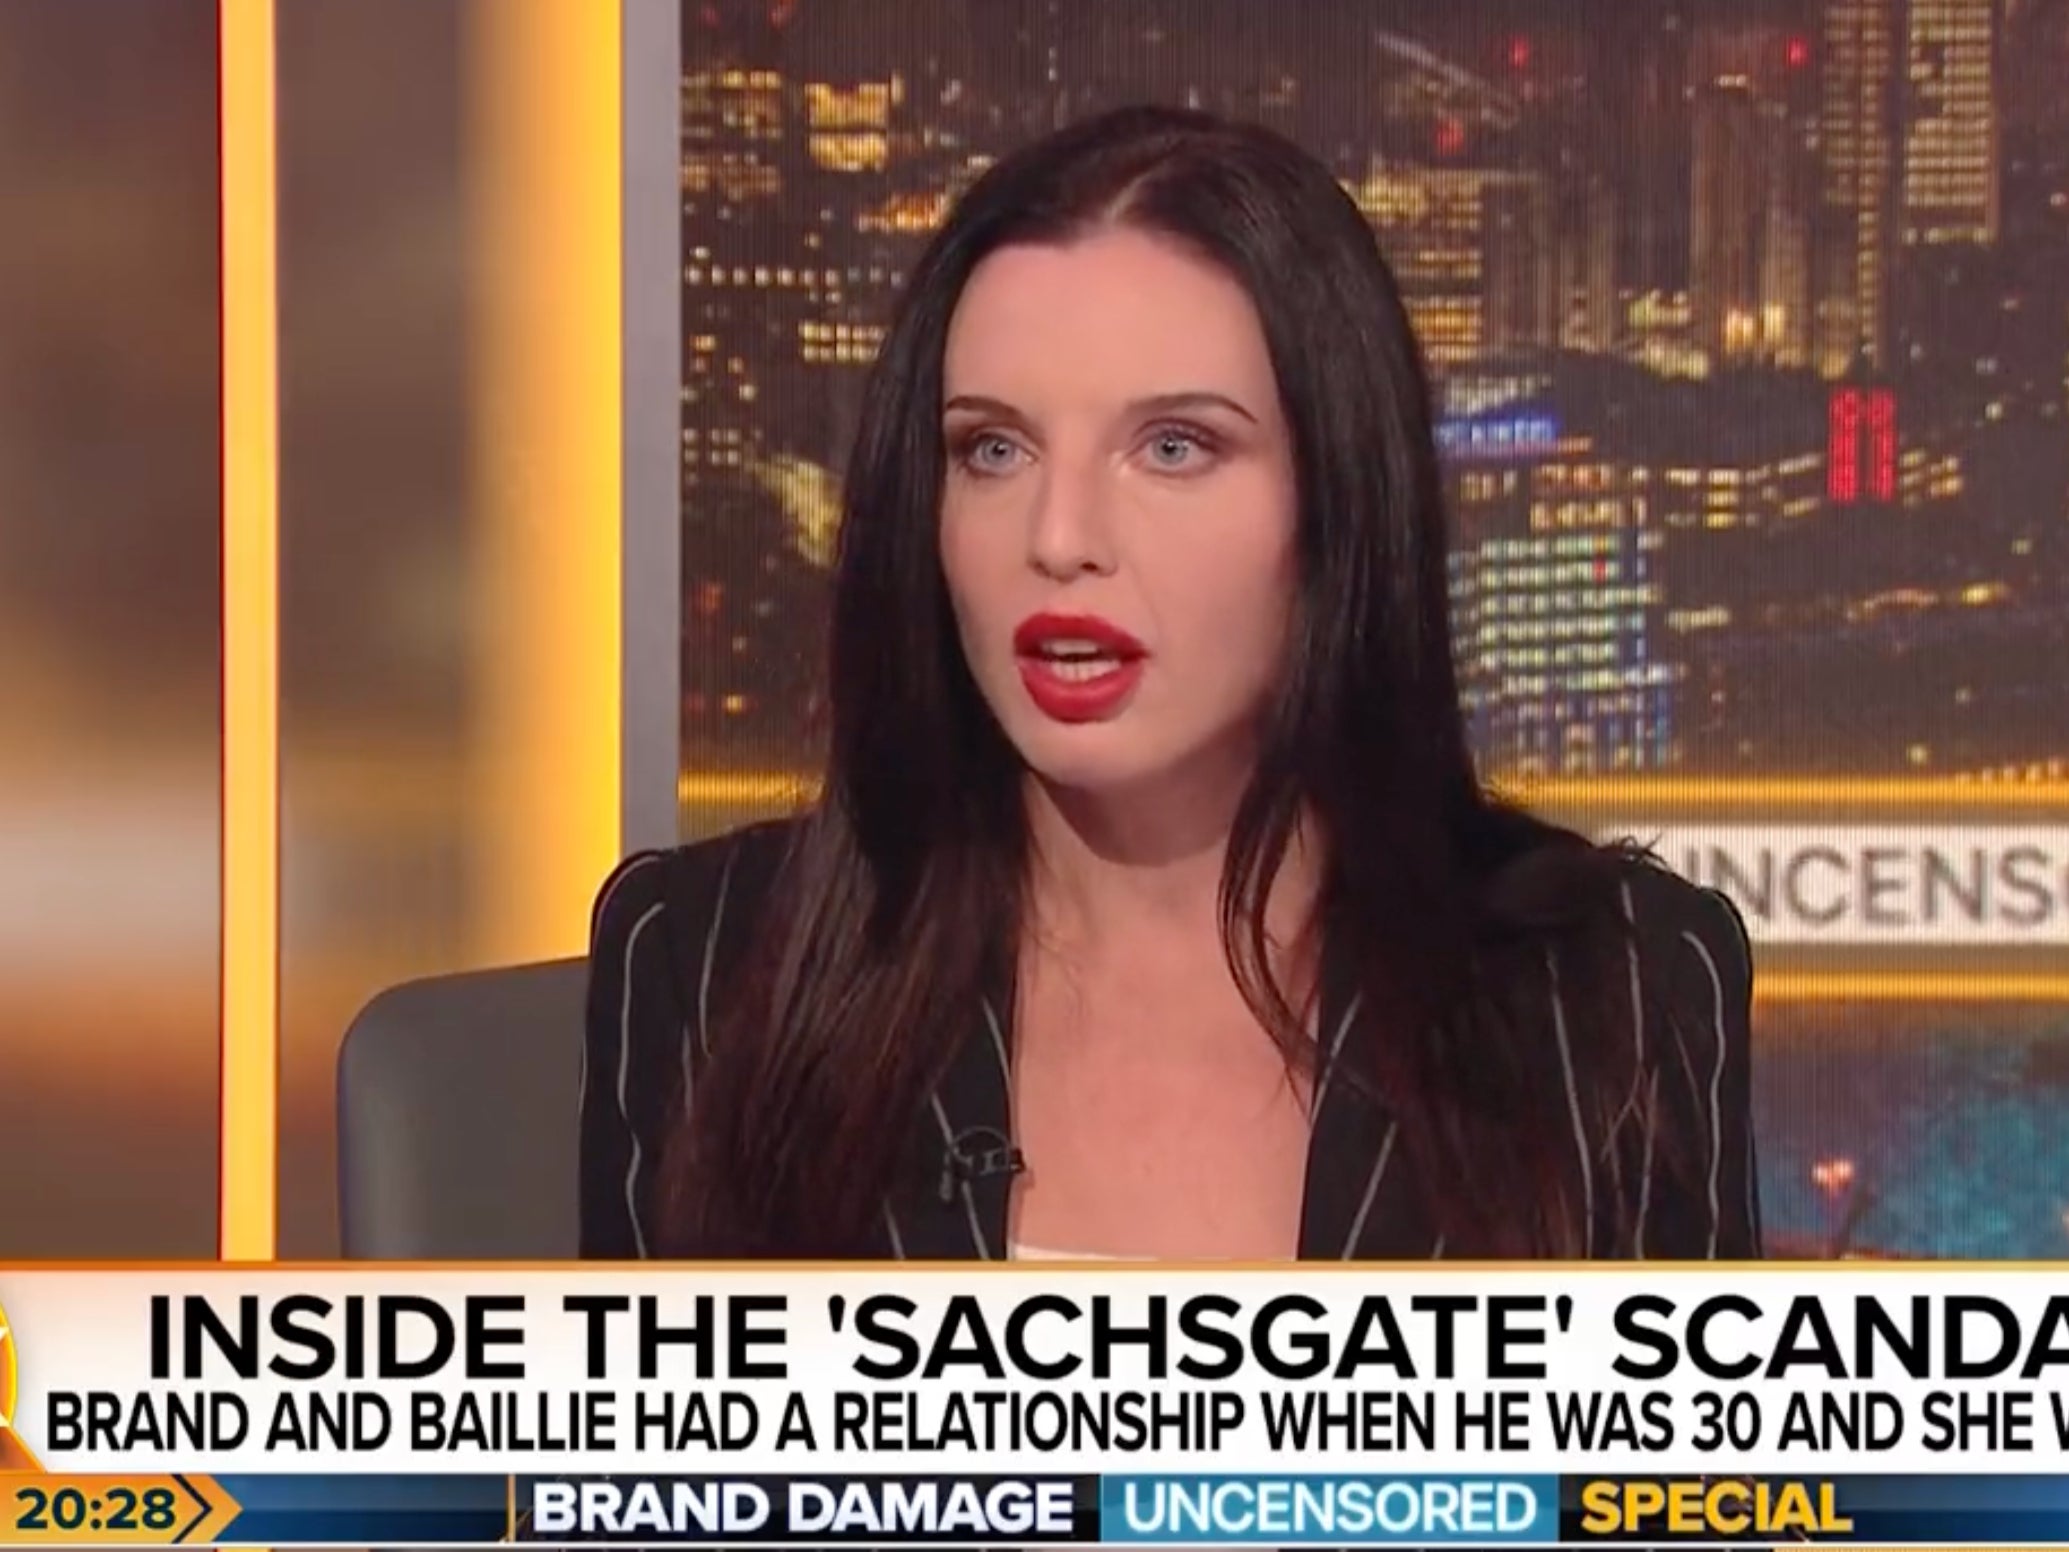 Georgina Baillie speaks to Piers Morgan about her experiences with Russell Brand